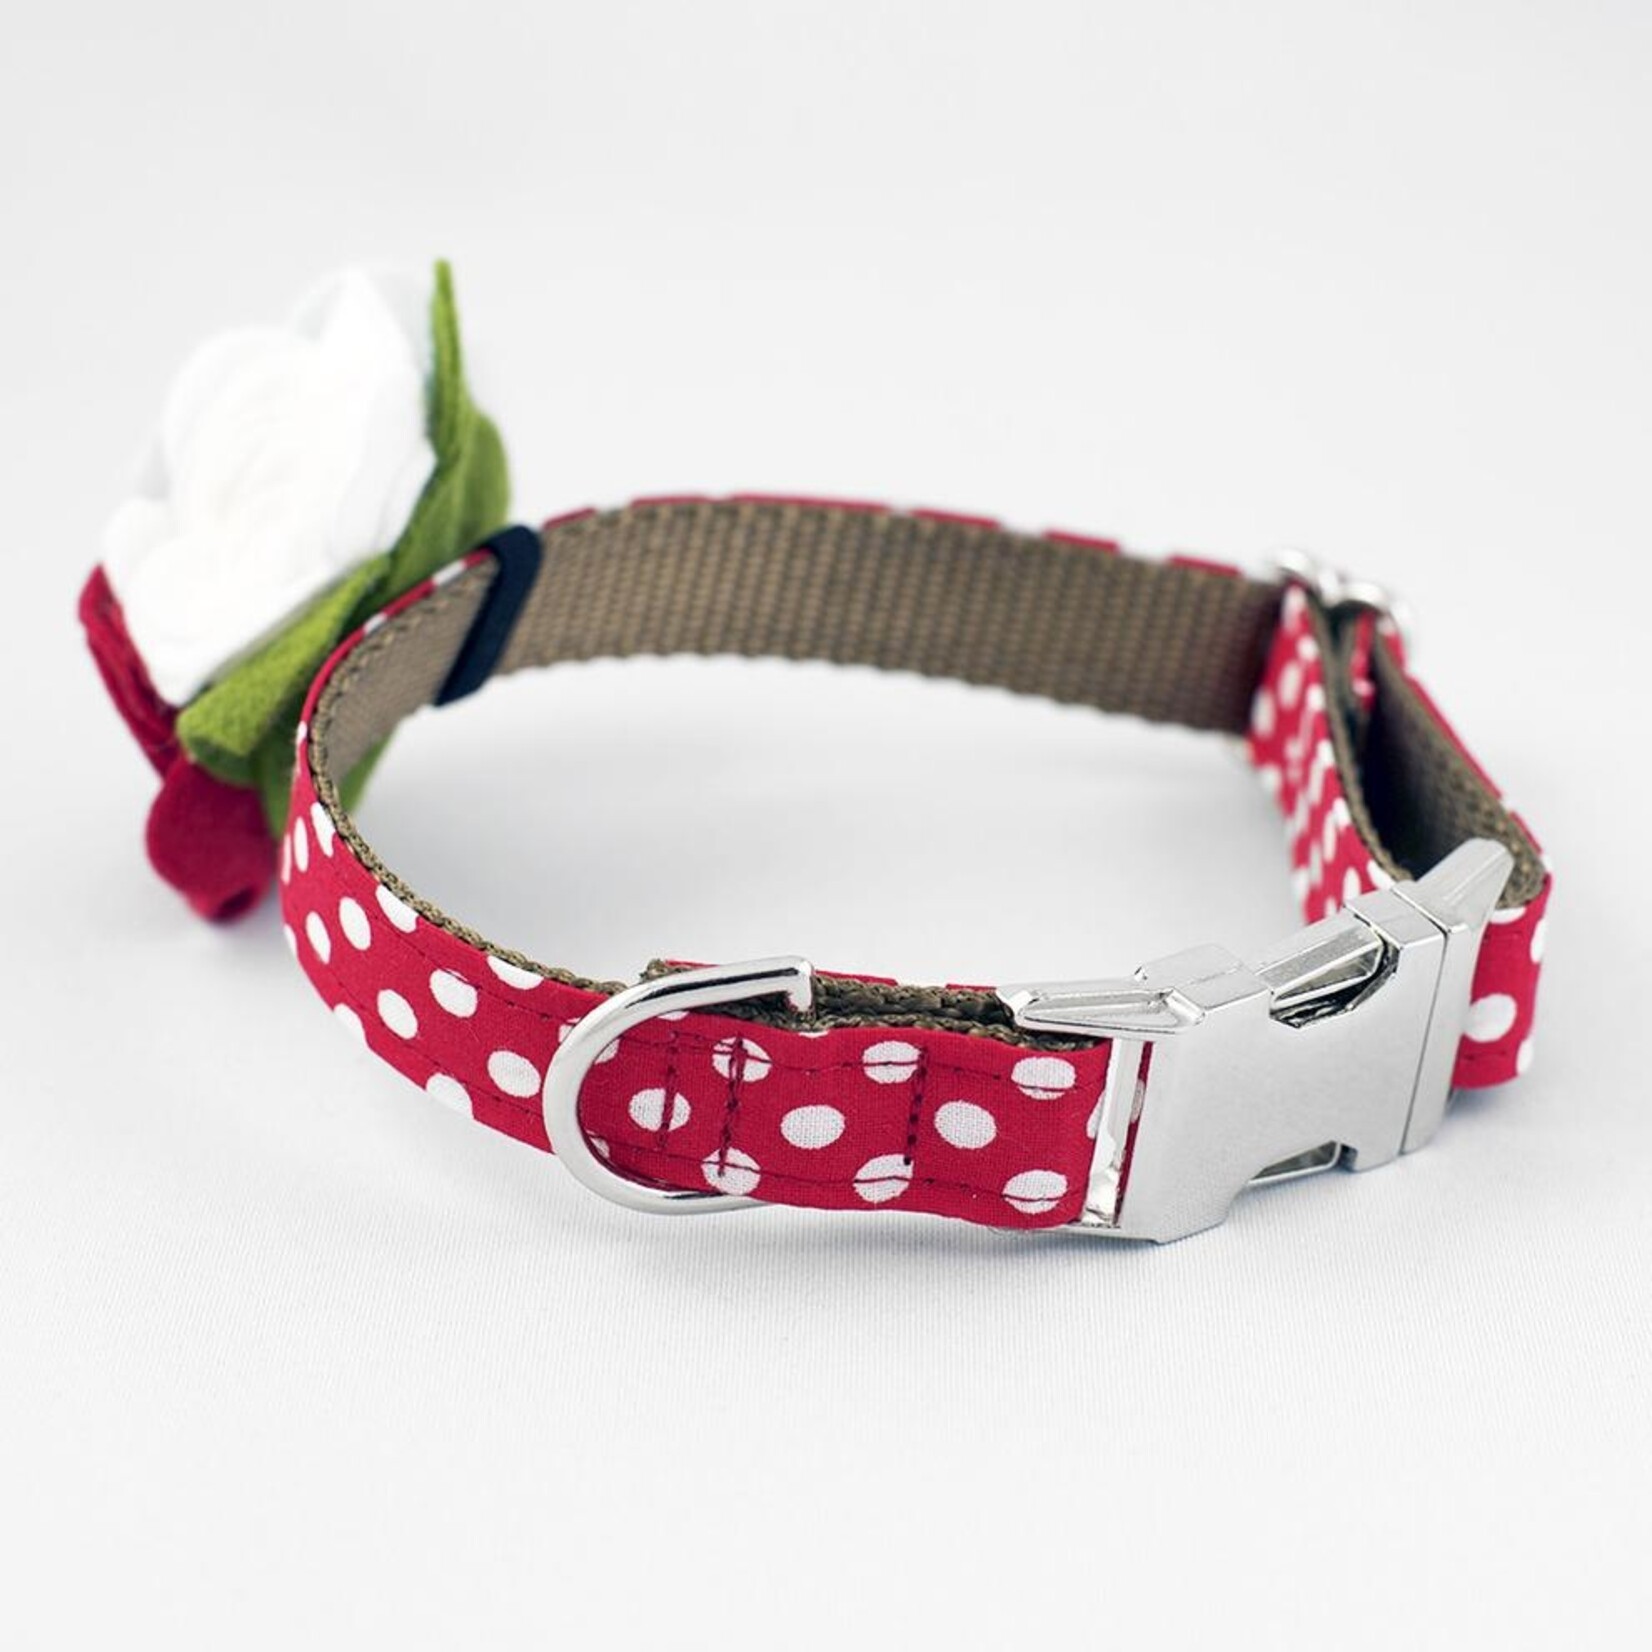 The Rover Boutique Red Dot Flower Collar